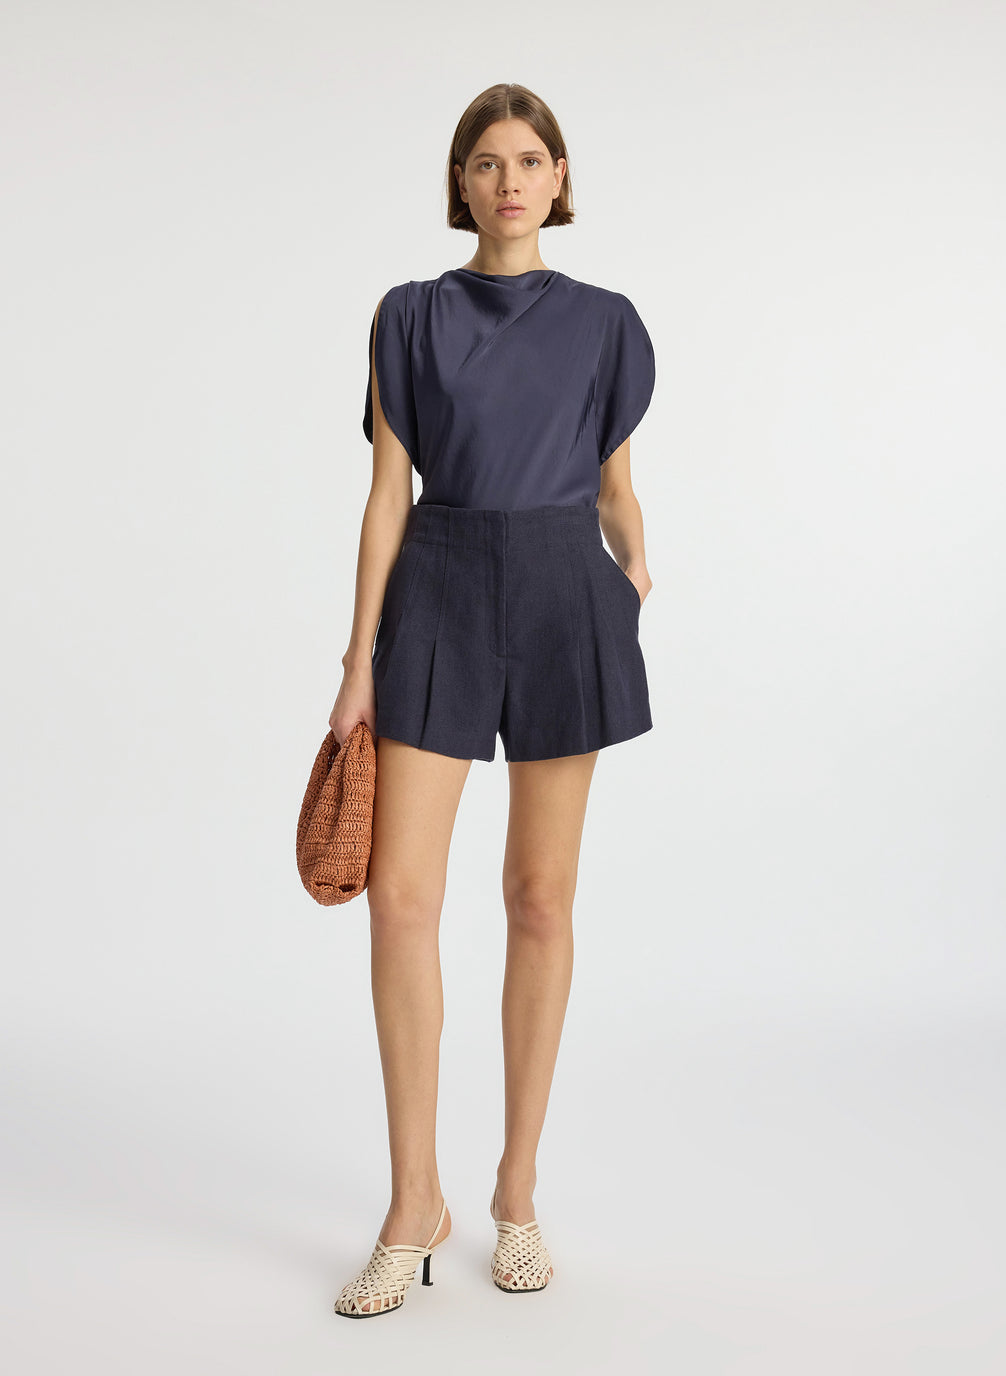 front view of woman wearing navy blue satin blouse and navy blue shorts